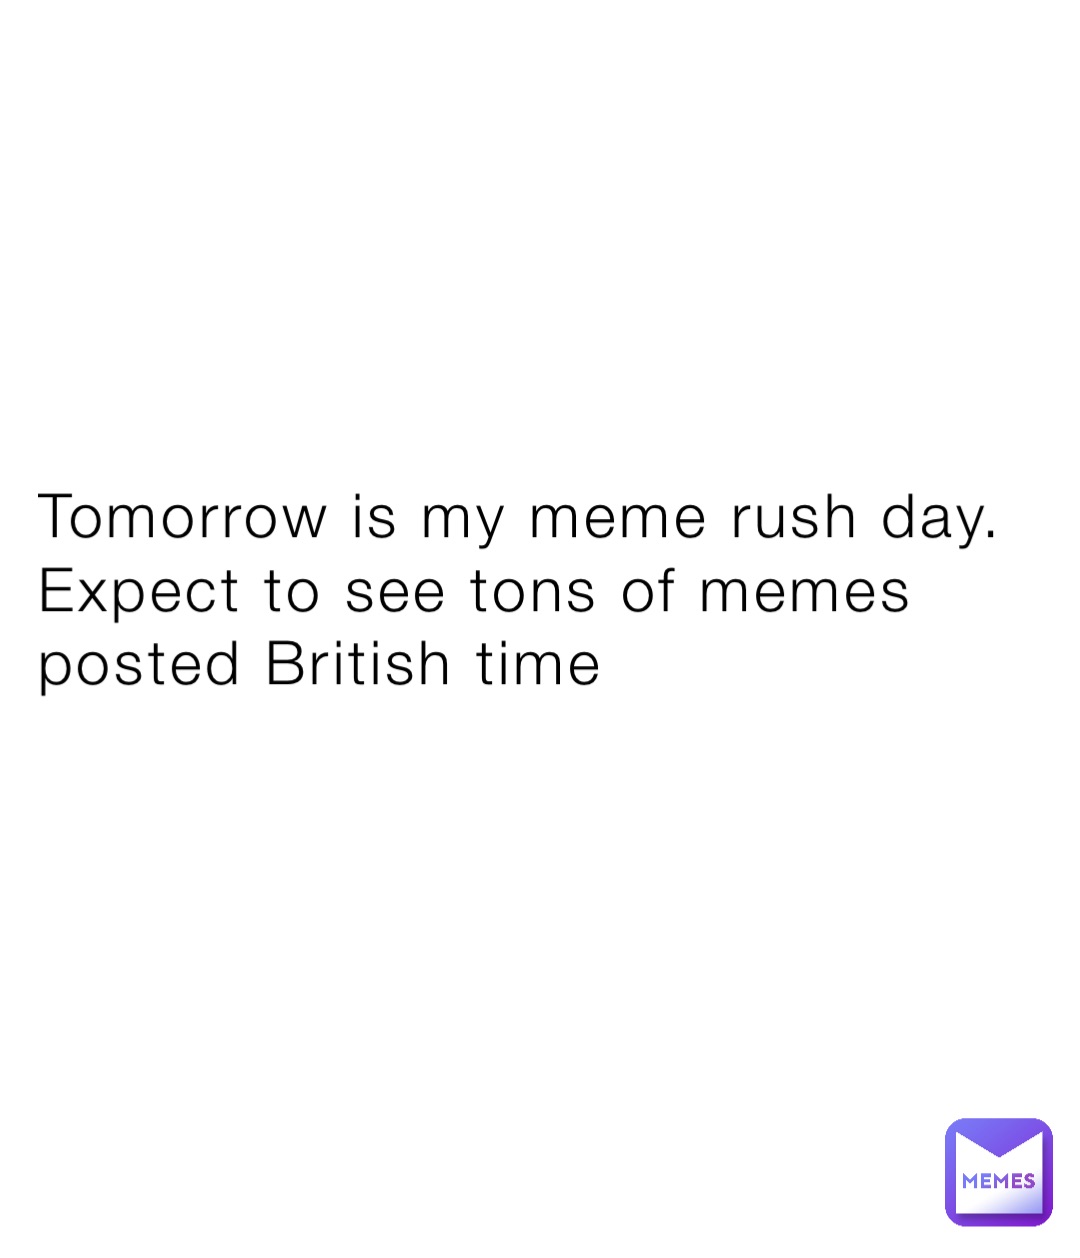 Tomorrow is my meme rush day. Expect to see tons of memes posted British time